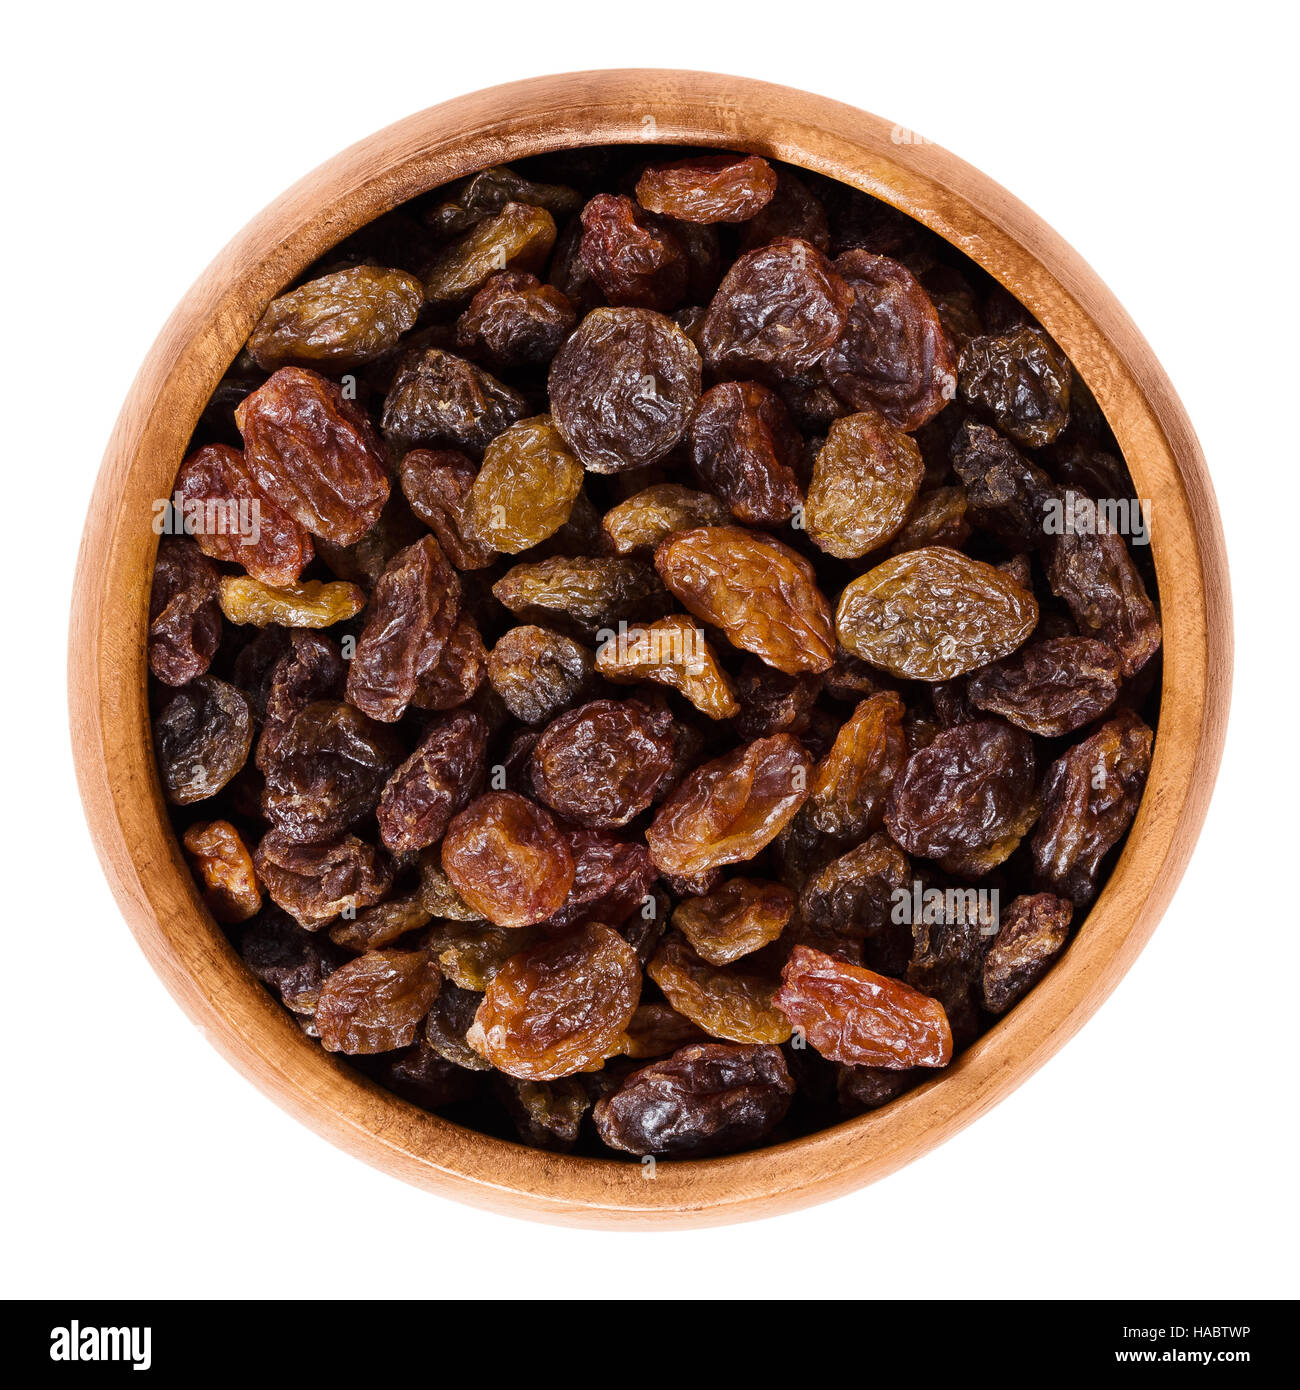 Raisins in wooden bowl made of dark brown colored large grapes. Edible dried seedless fruits, organic and raw. Stock Photo